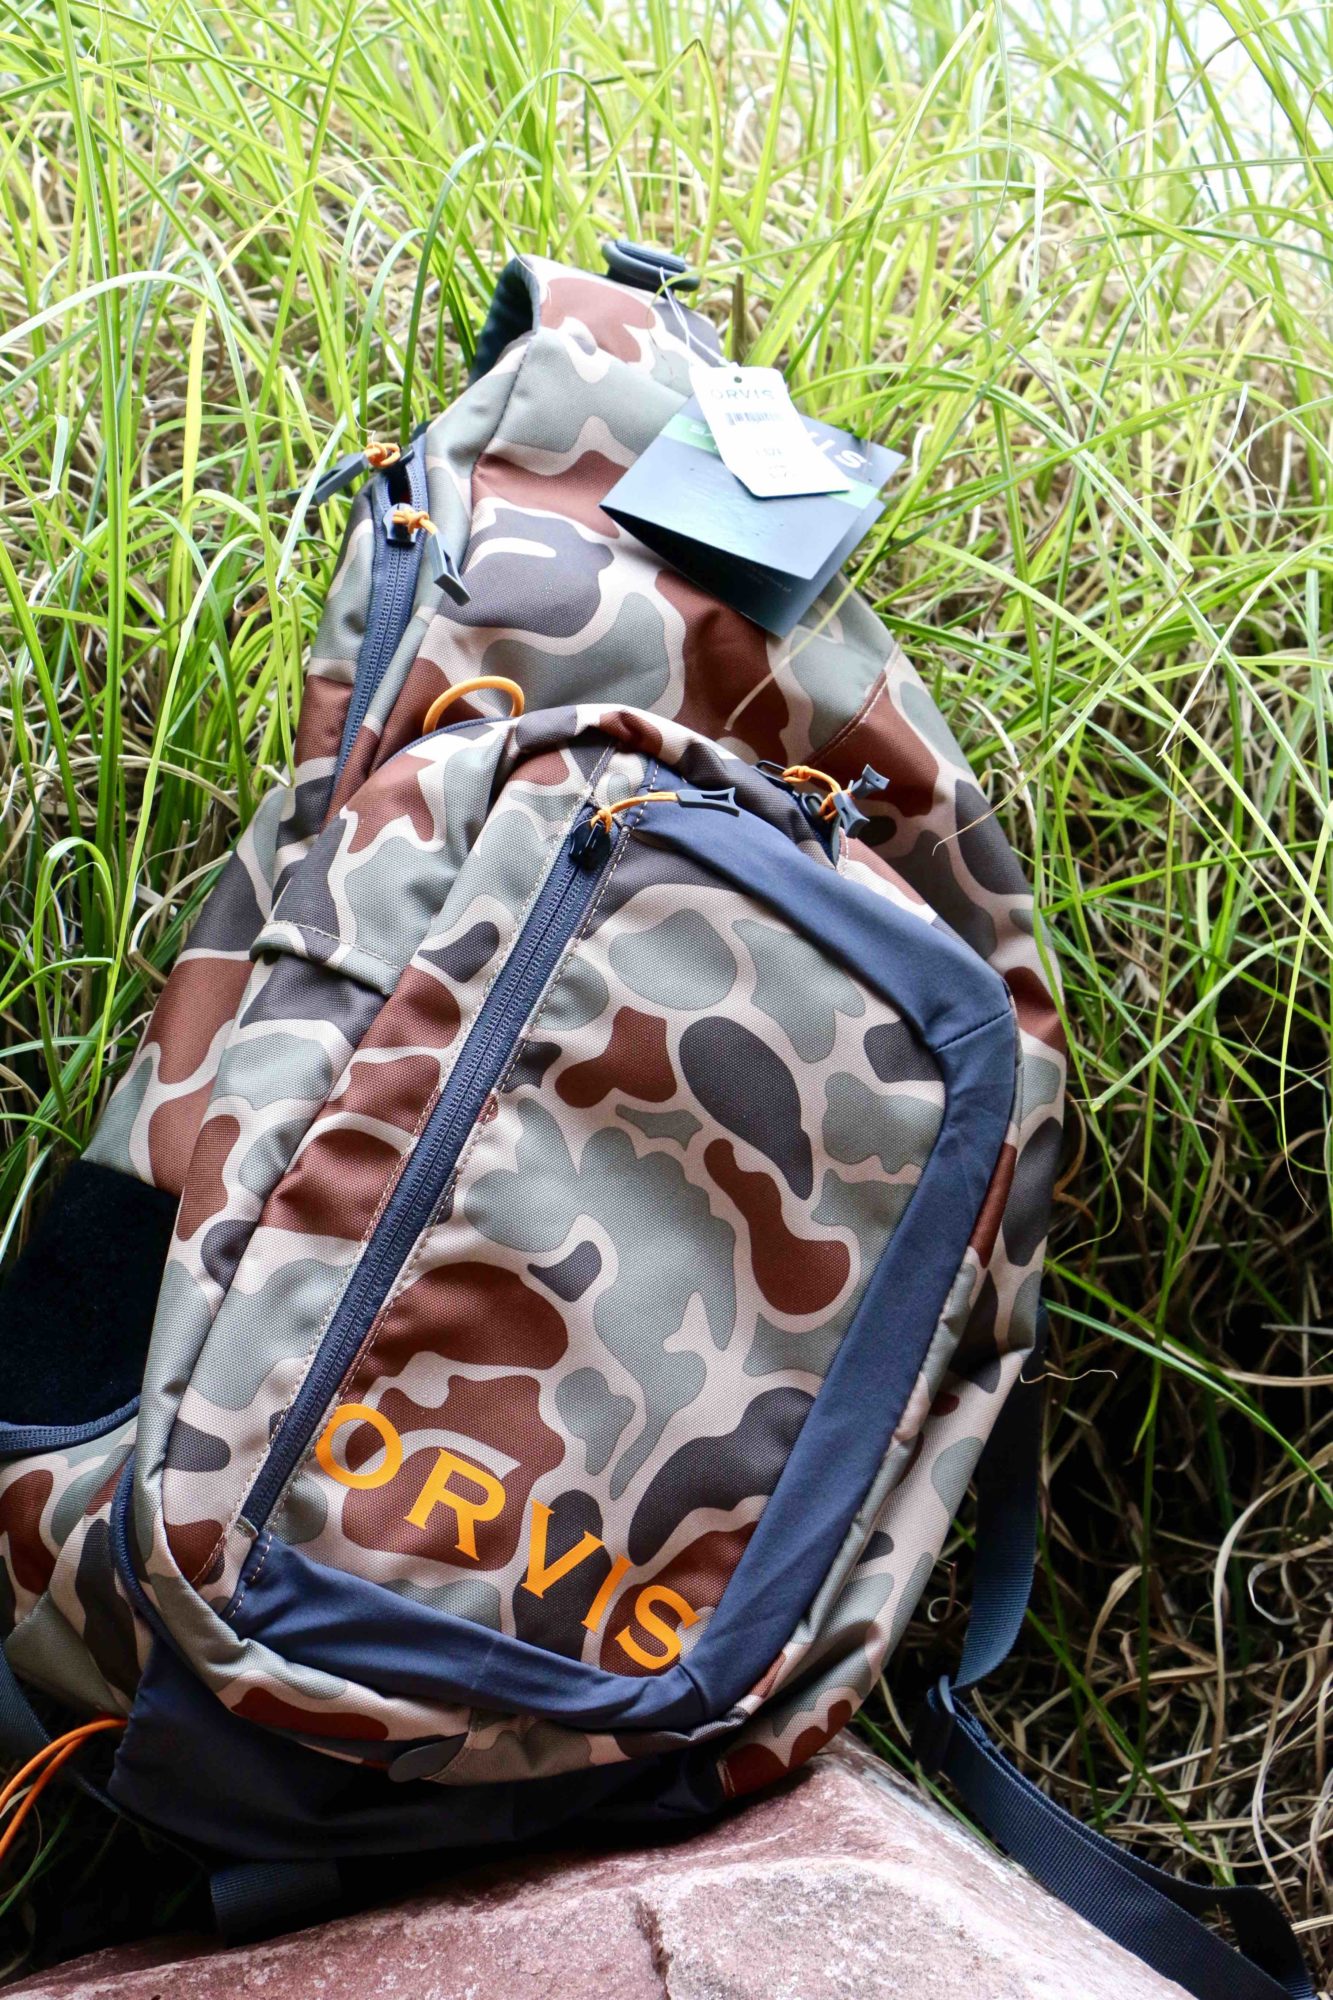 Our Guides Review Packs & Slings - Angler's Covey